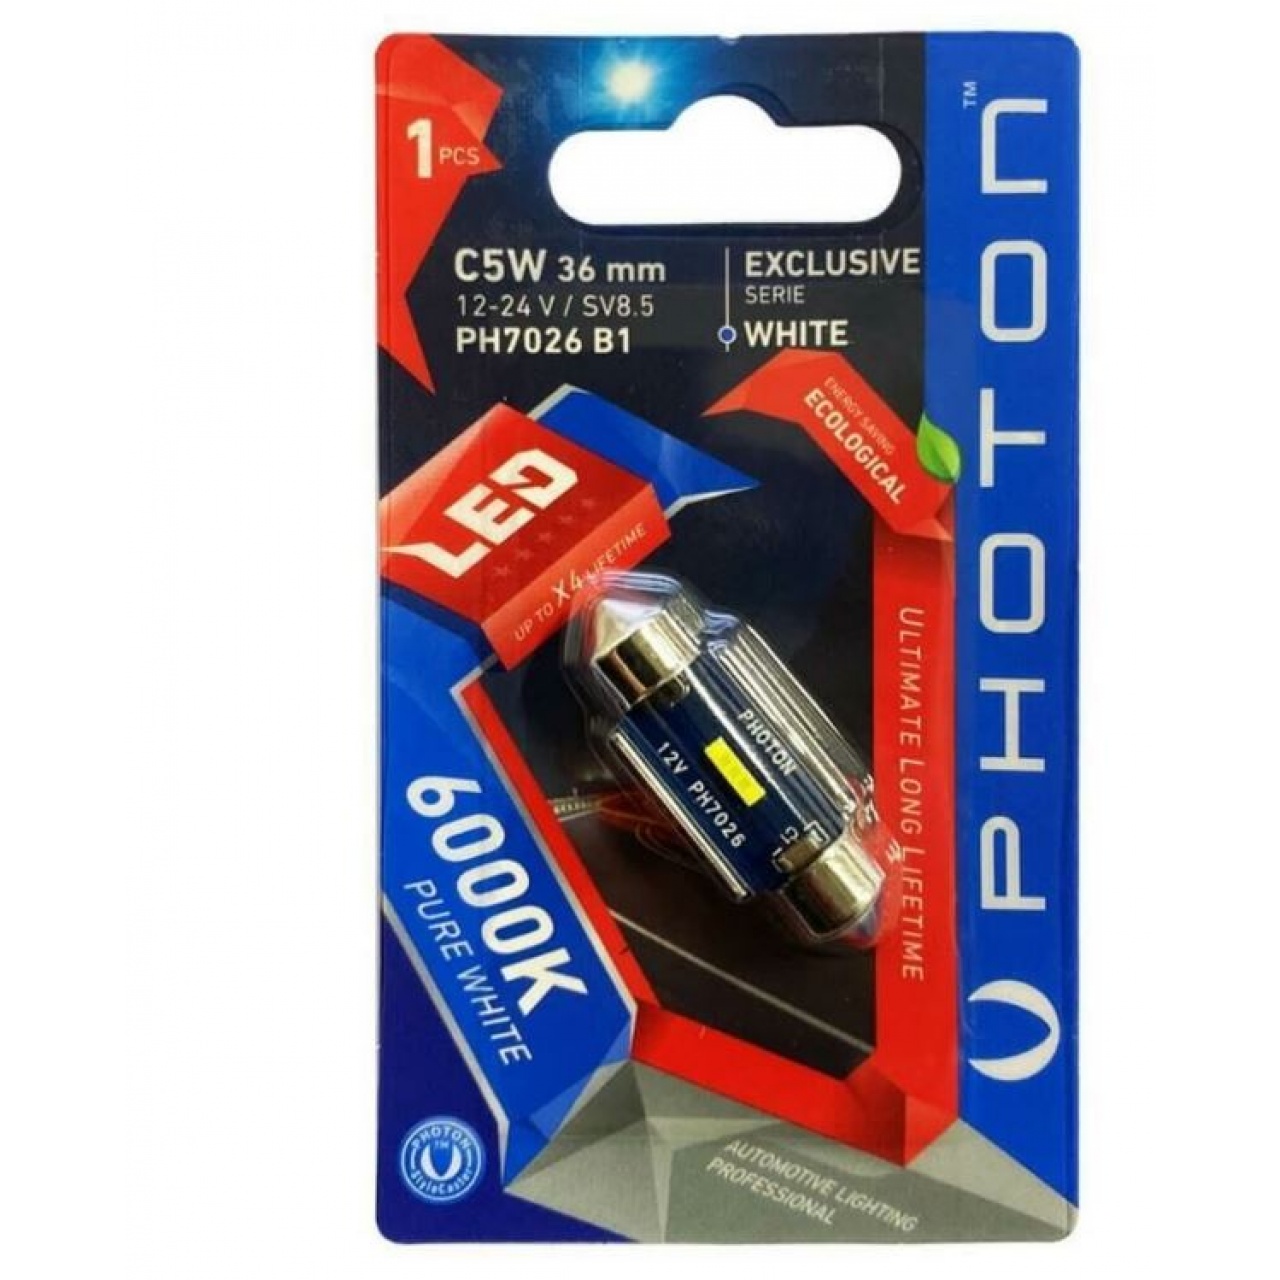 Photon C5W 12-24V 36mm Sofit Exclusive Serisi Can-Bus Led PH7026